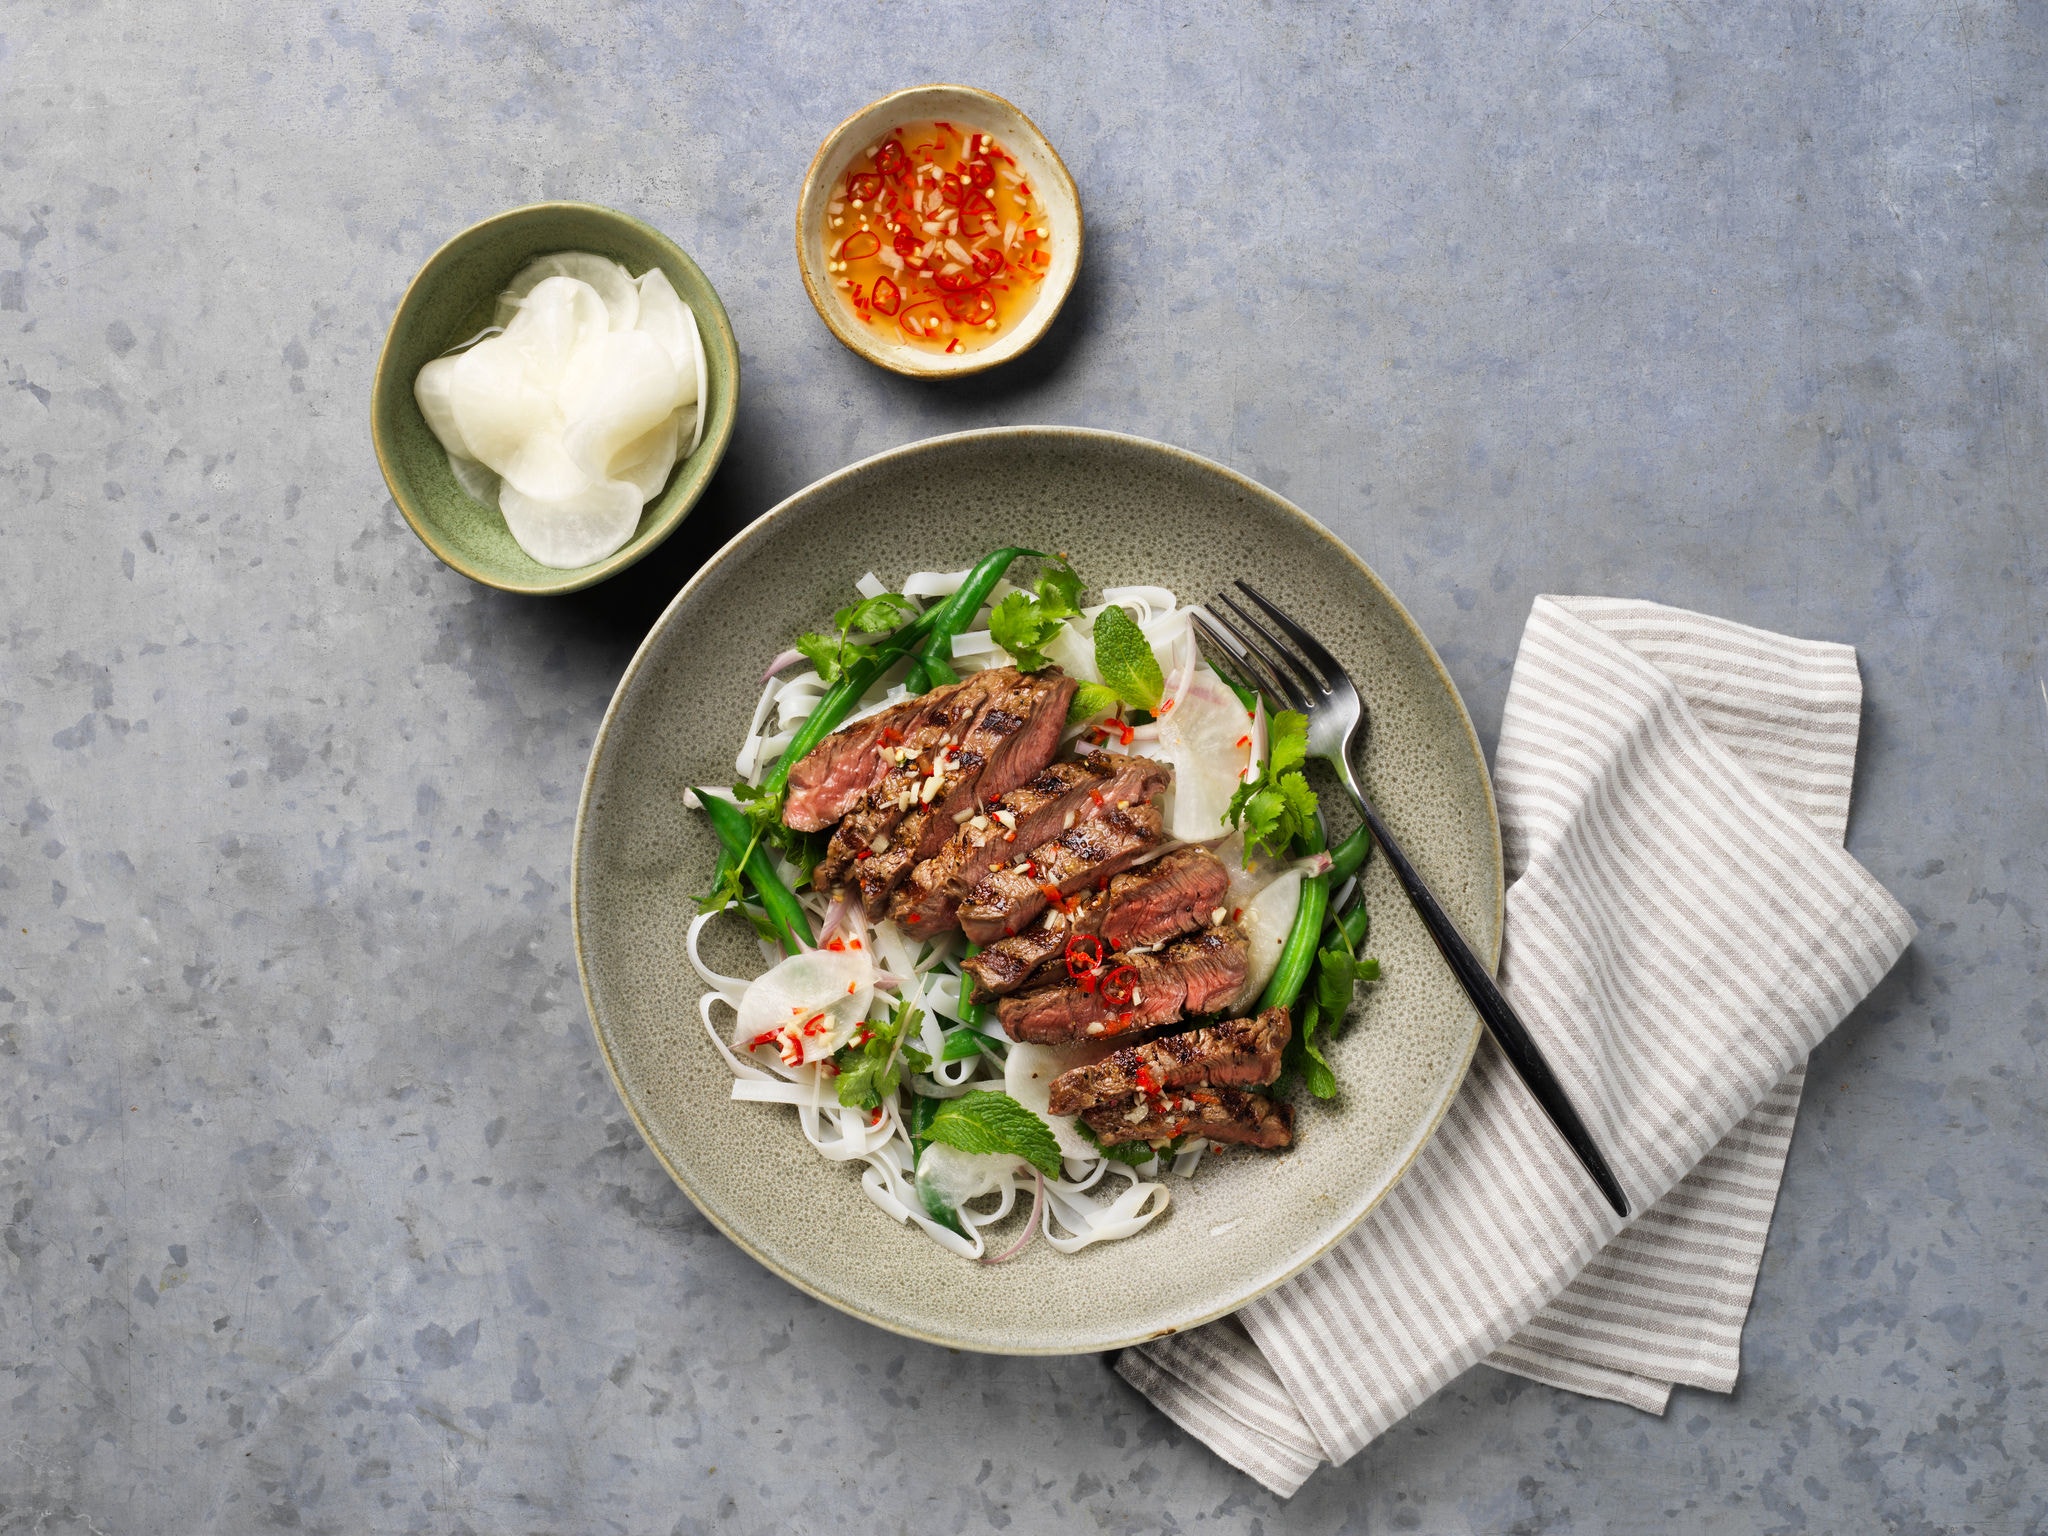 Seared Beef Rib-Eye and Pickled Daikon Salad with Nuoc Cham Dressing